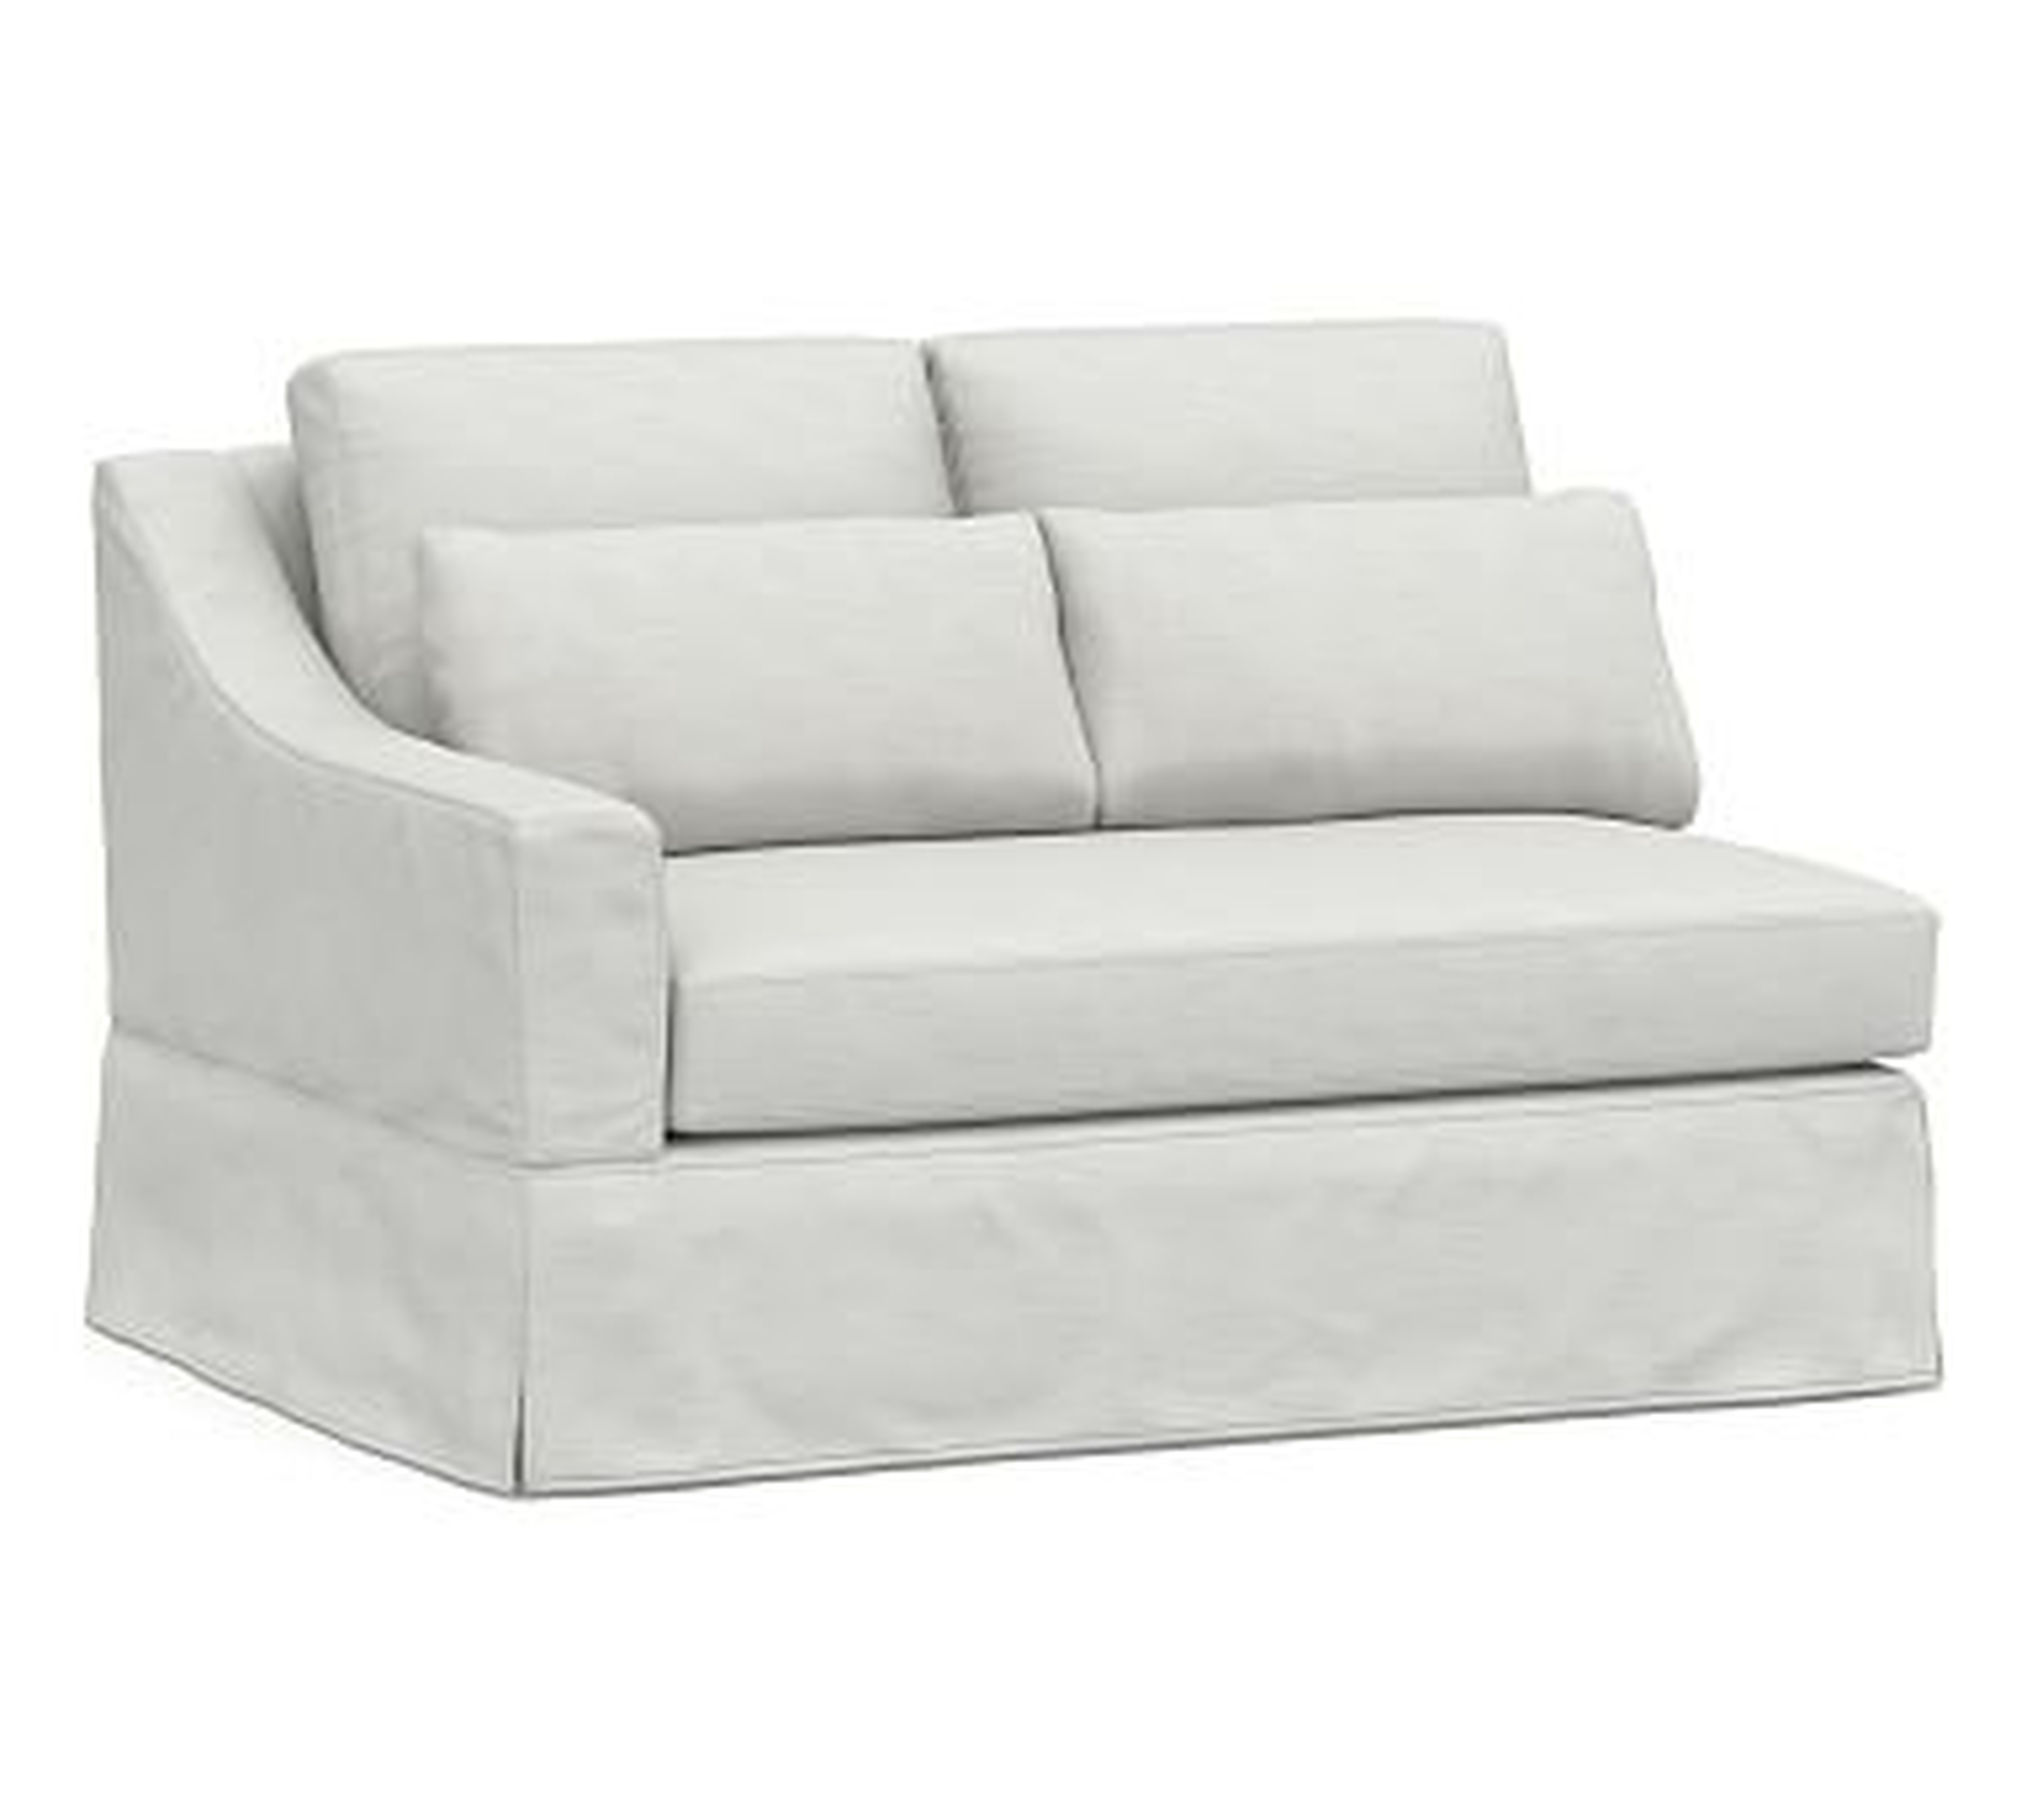 York Slope Arm Slipcovered Deep Seat Left-arm Loveseat with Bench Cushion, Down Blend Wrapped Cushions, Performance Slub Cotton White - Pottery Barn